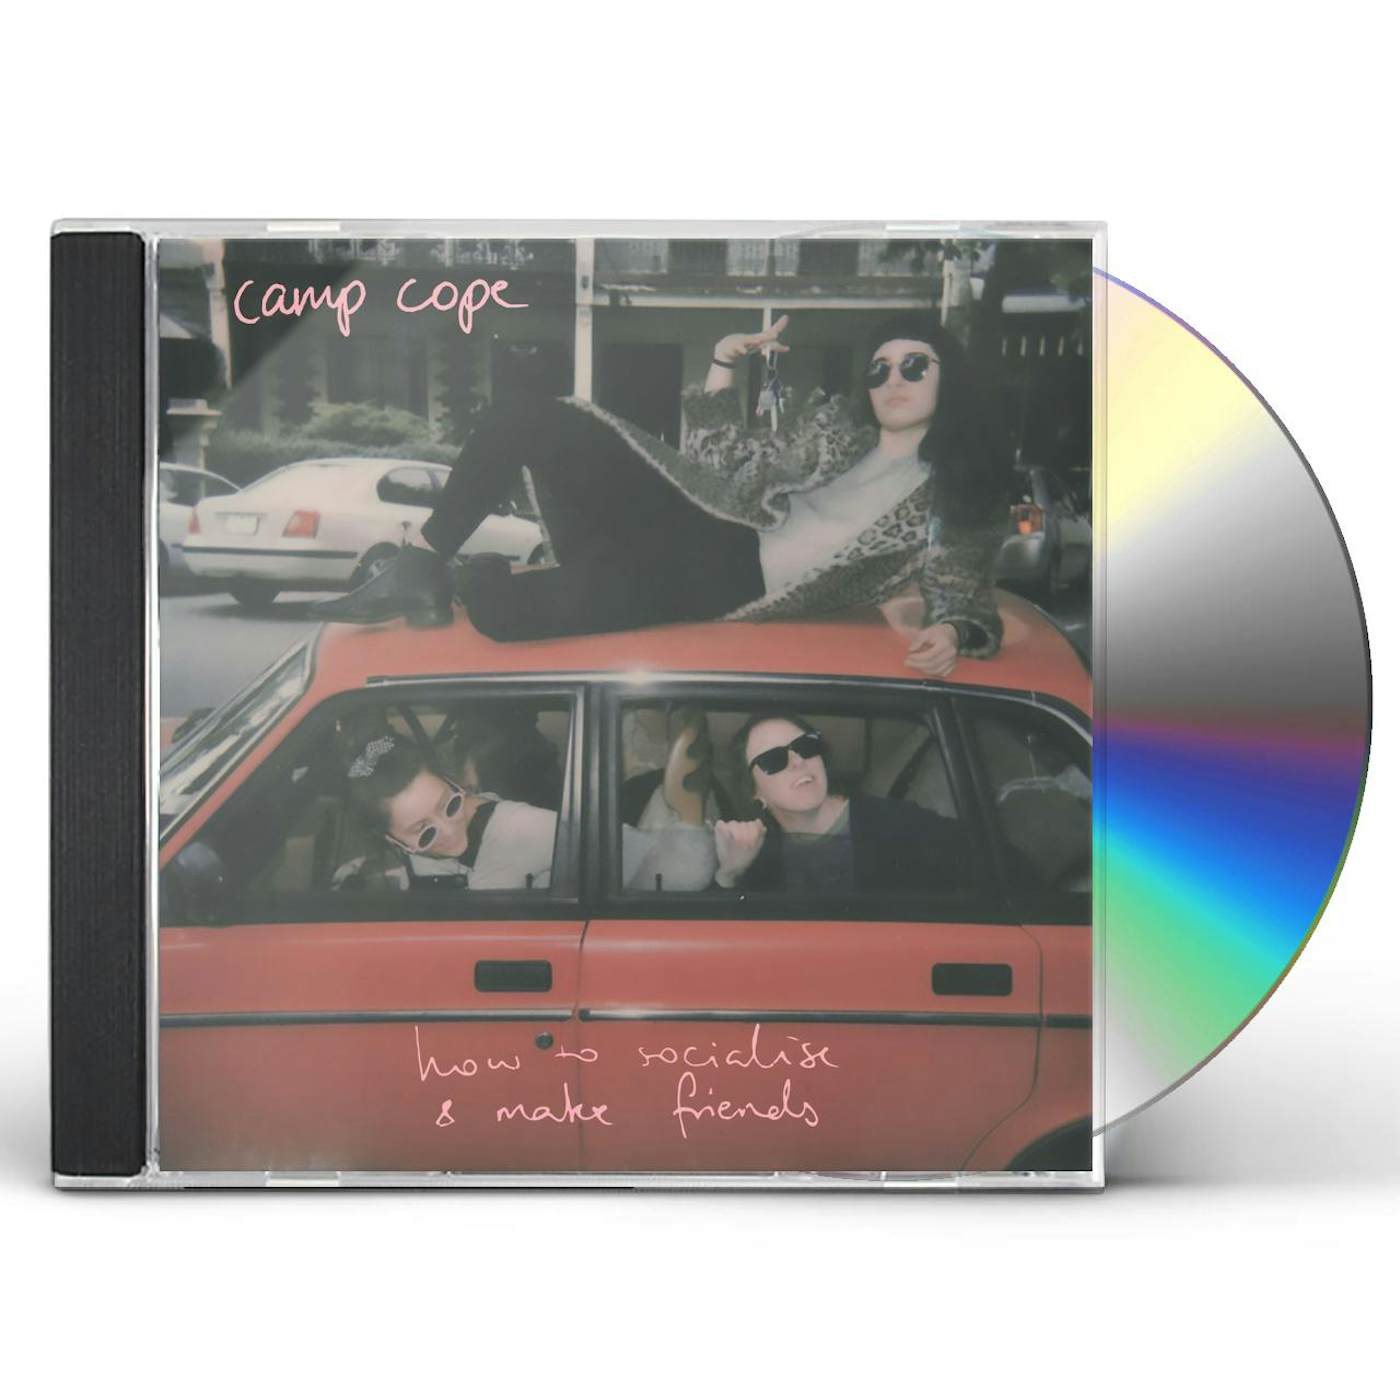 Camp Cope HOW TO SOCIALISE & MAKE FRIENDS CD